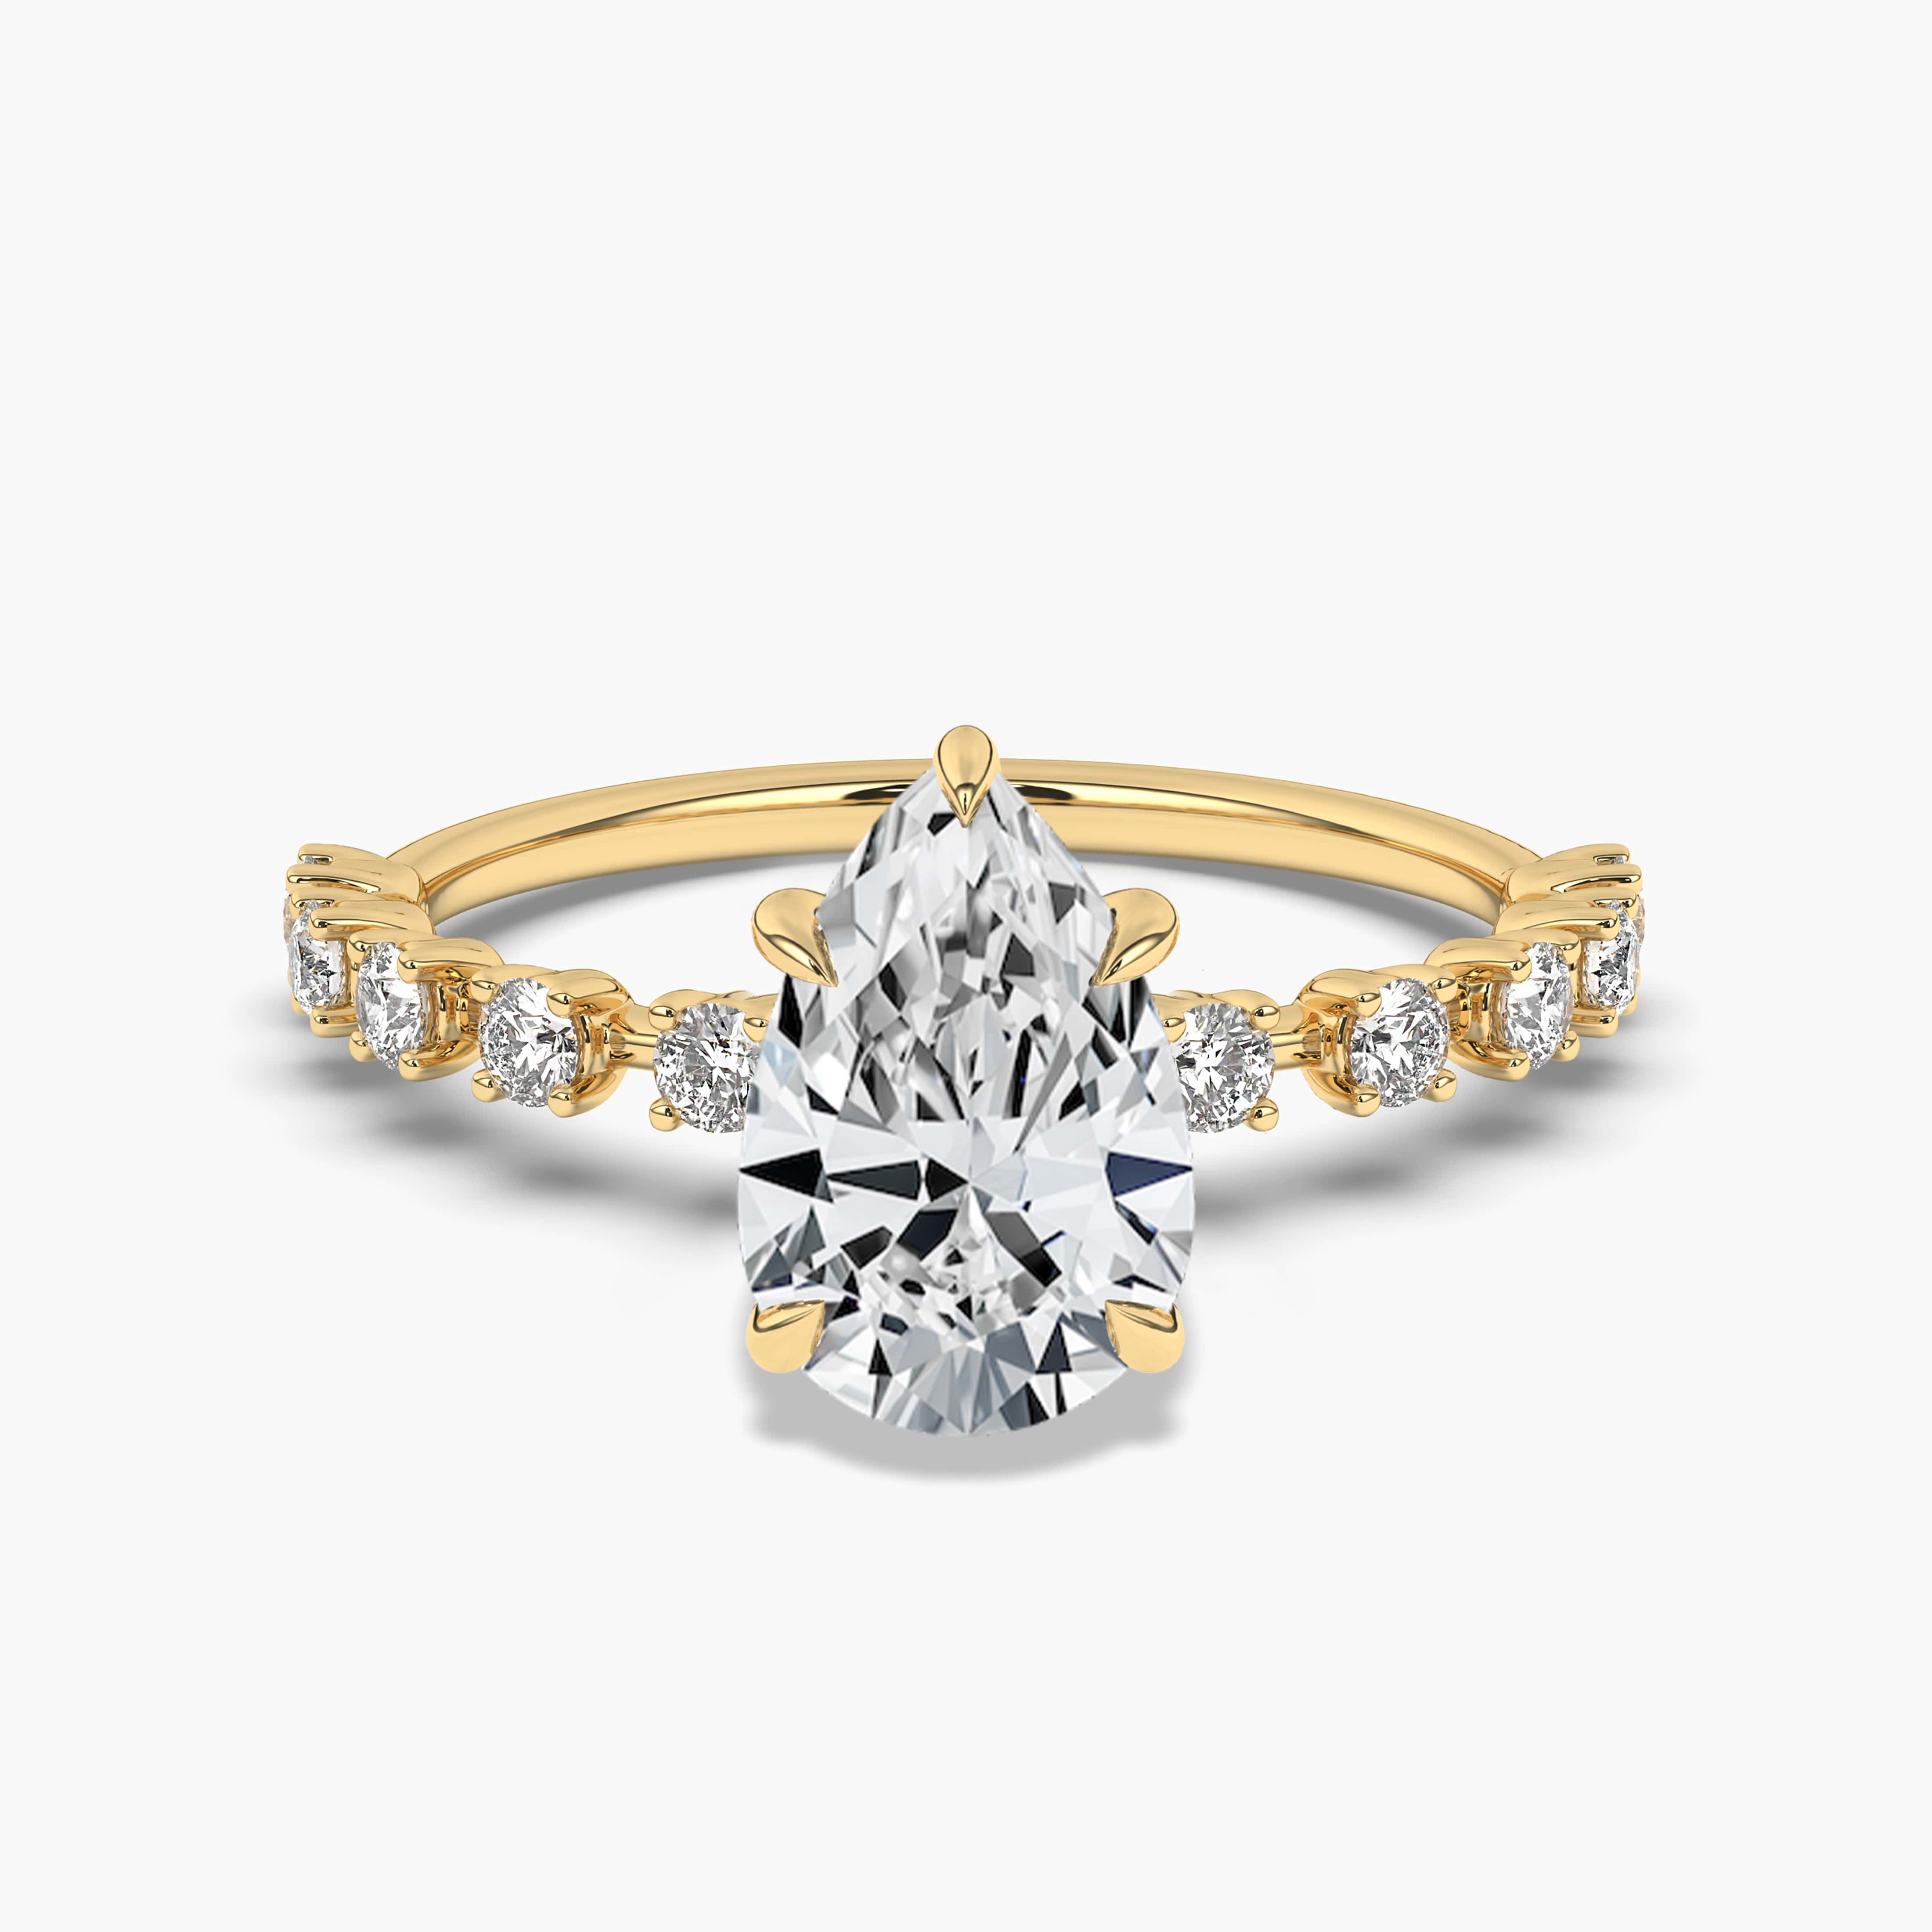 2.00ct Pear shaped diamond engagement ring